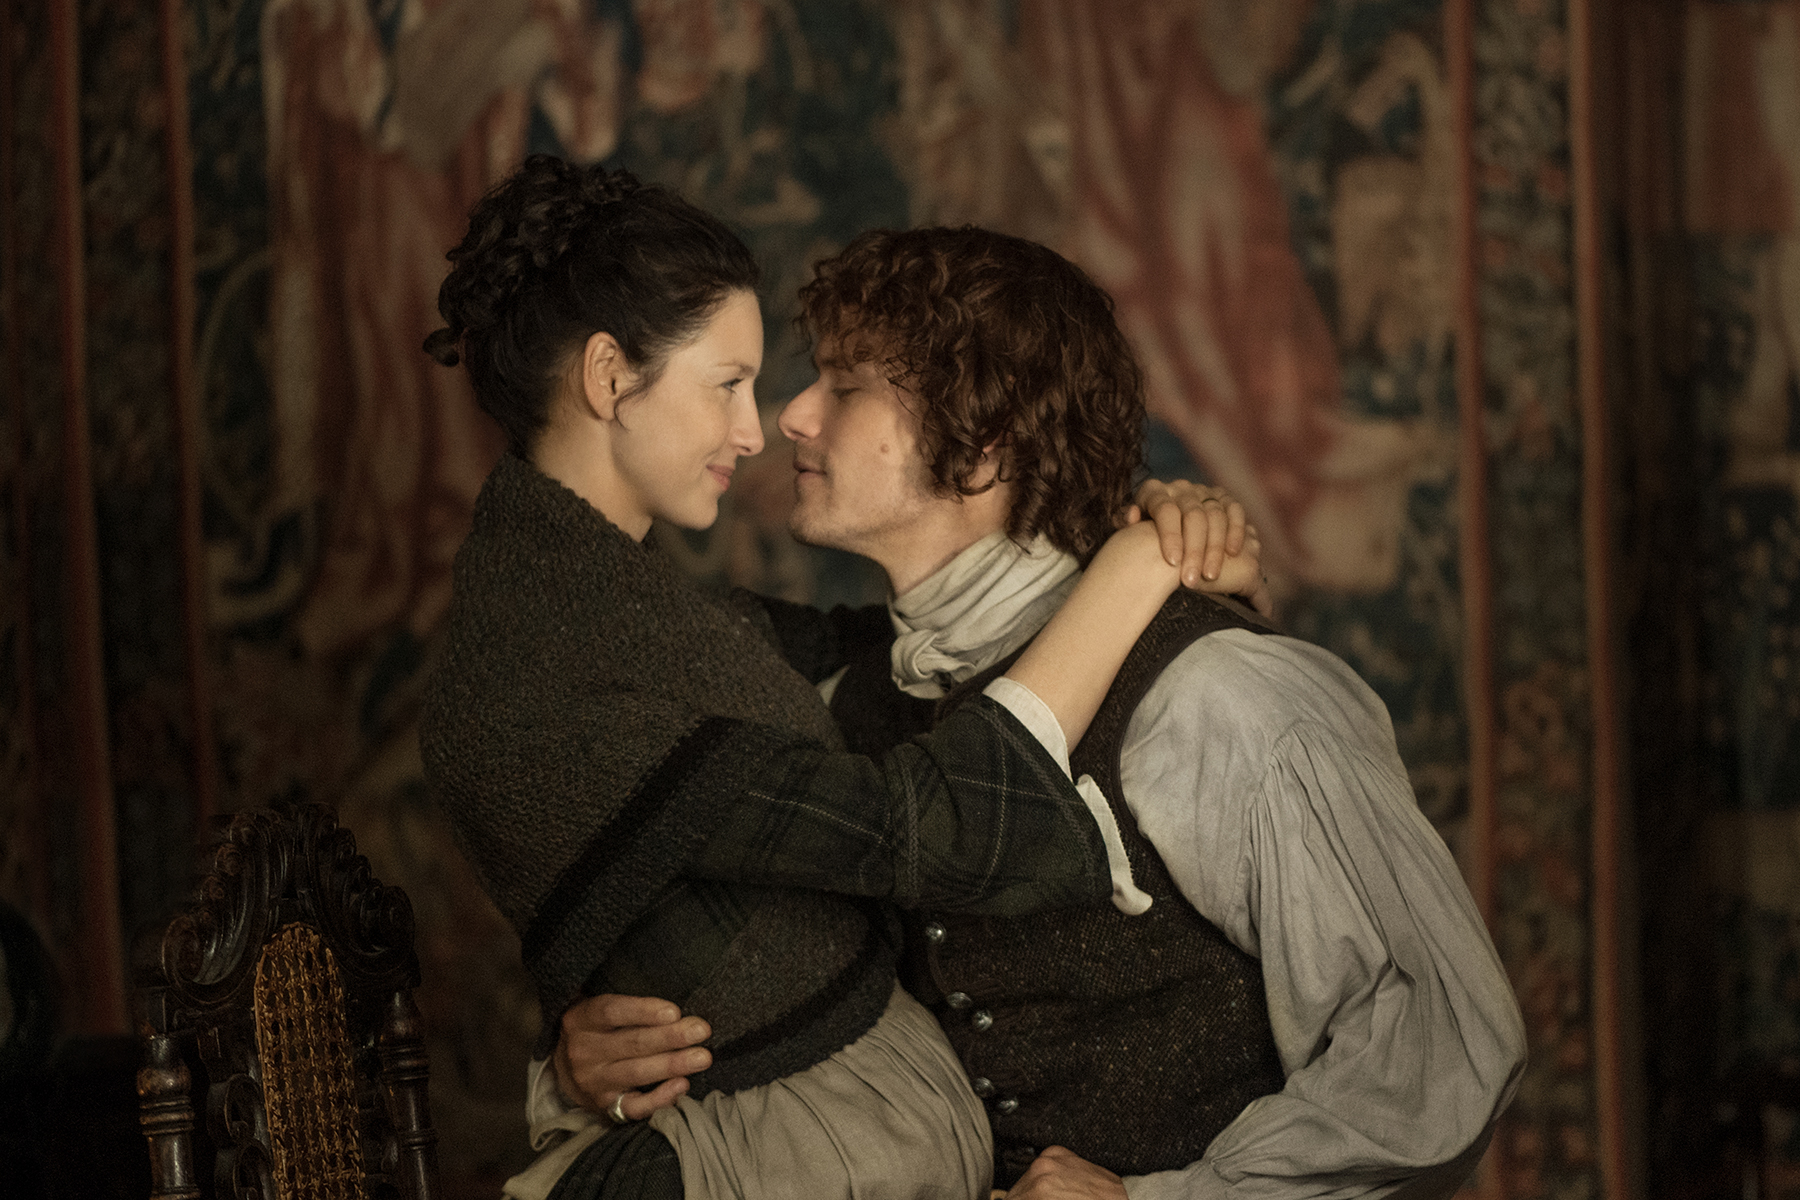 This right here is what dreams are made of. (Caitriona Balfe as Claire Fraser and Sam Heughan as Jamie Fraser share a loving embrace.)